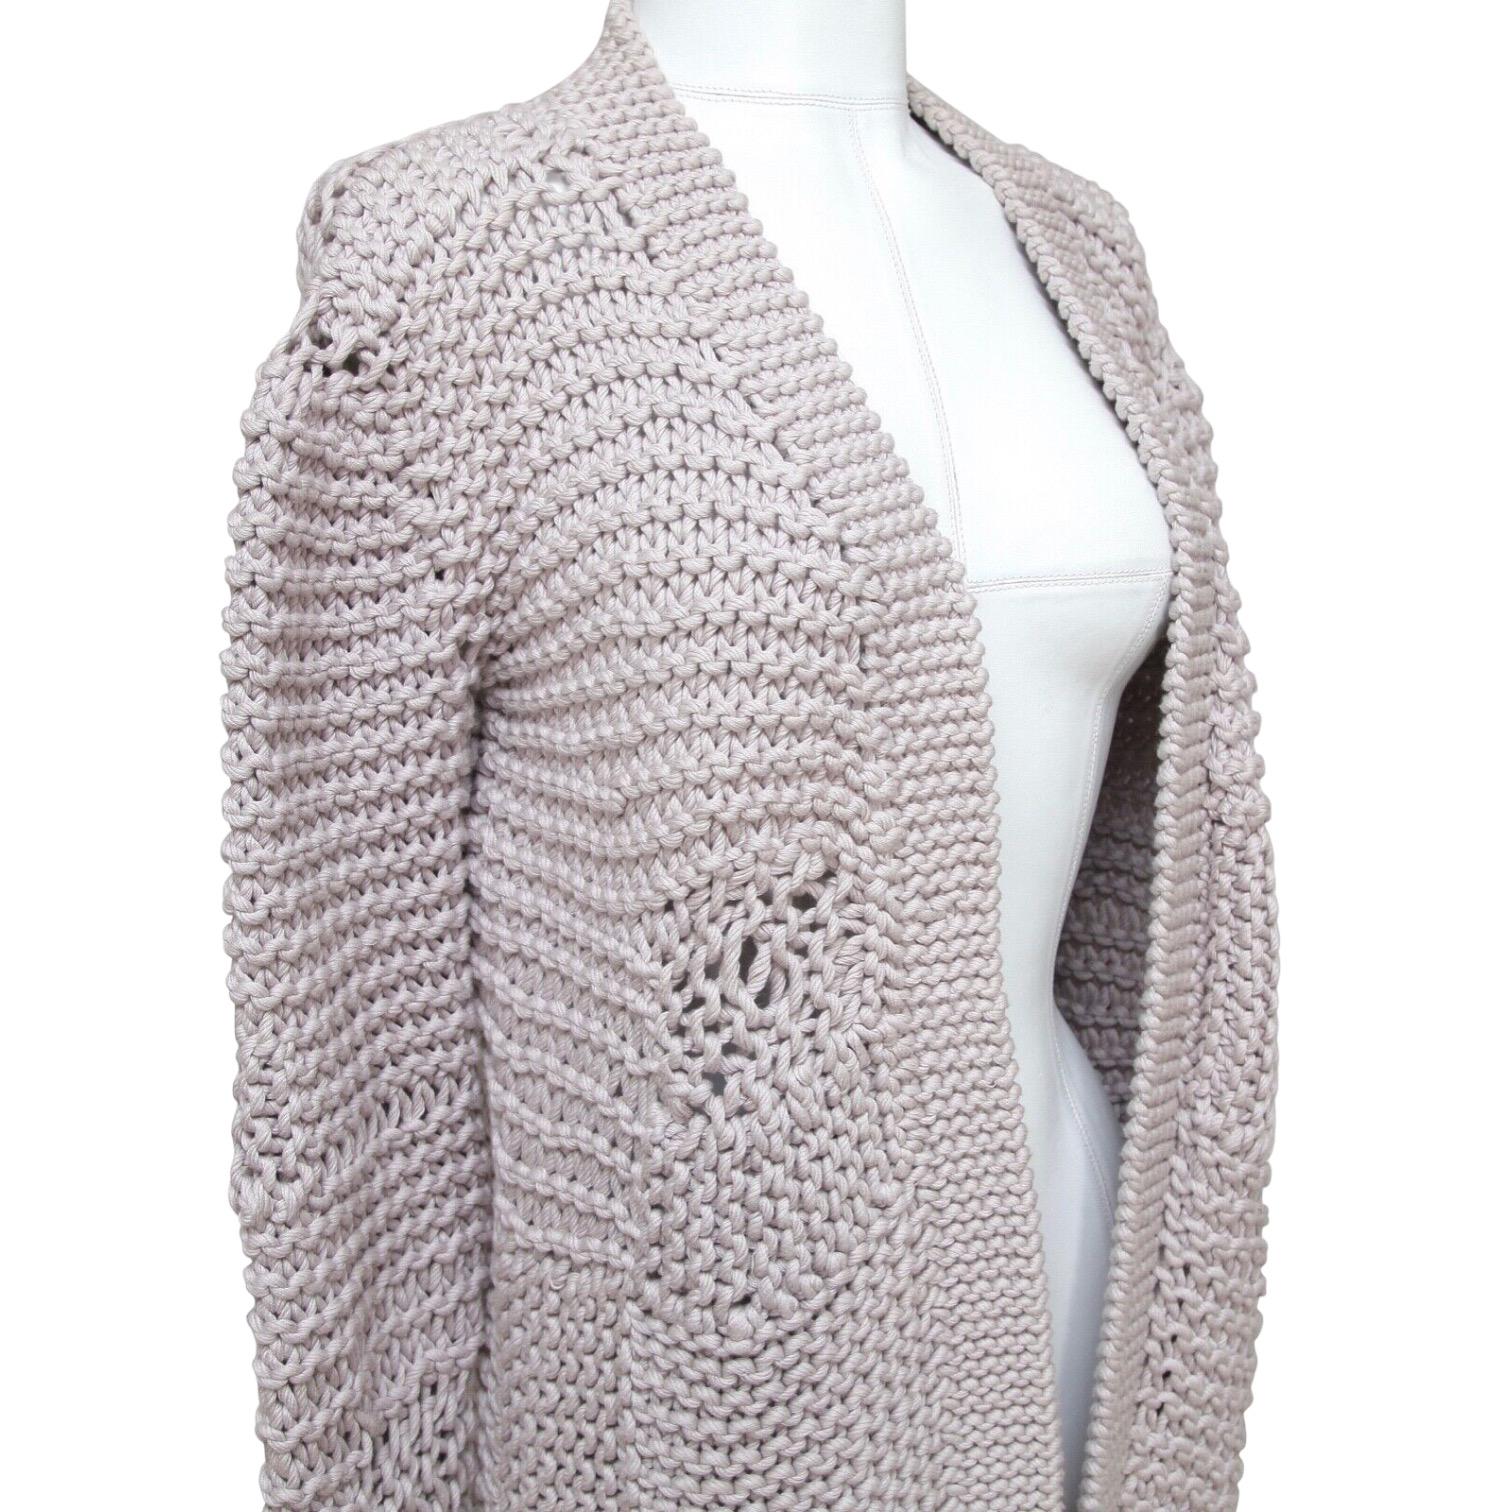 CHLOE Cardigan Sweater Knit Grey Lavender Open Front Long Sleeve Sz S 2008 In Fair Condition For Sale In Hollywood, FL